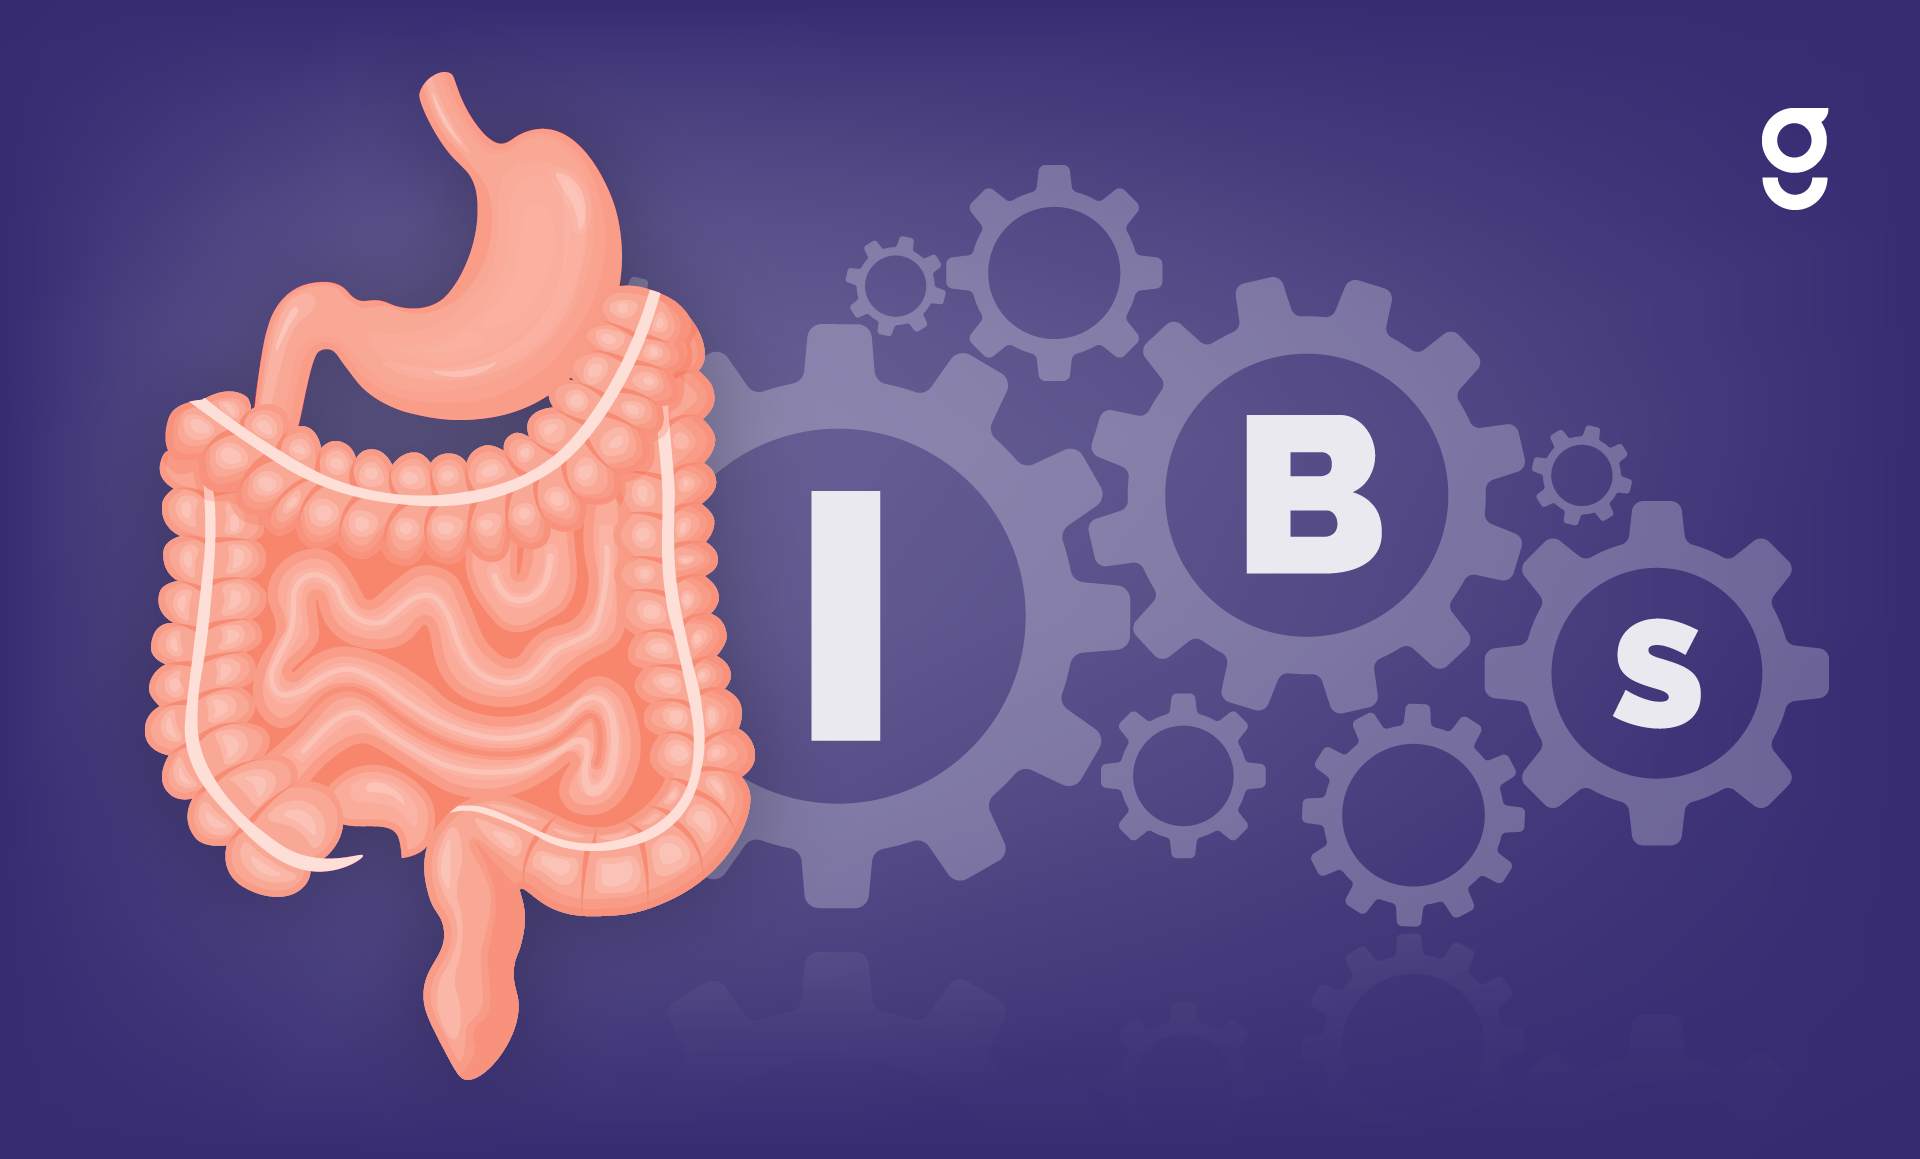 Improve the lives of your employees with IBS with integrative healthcare